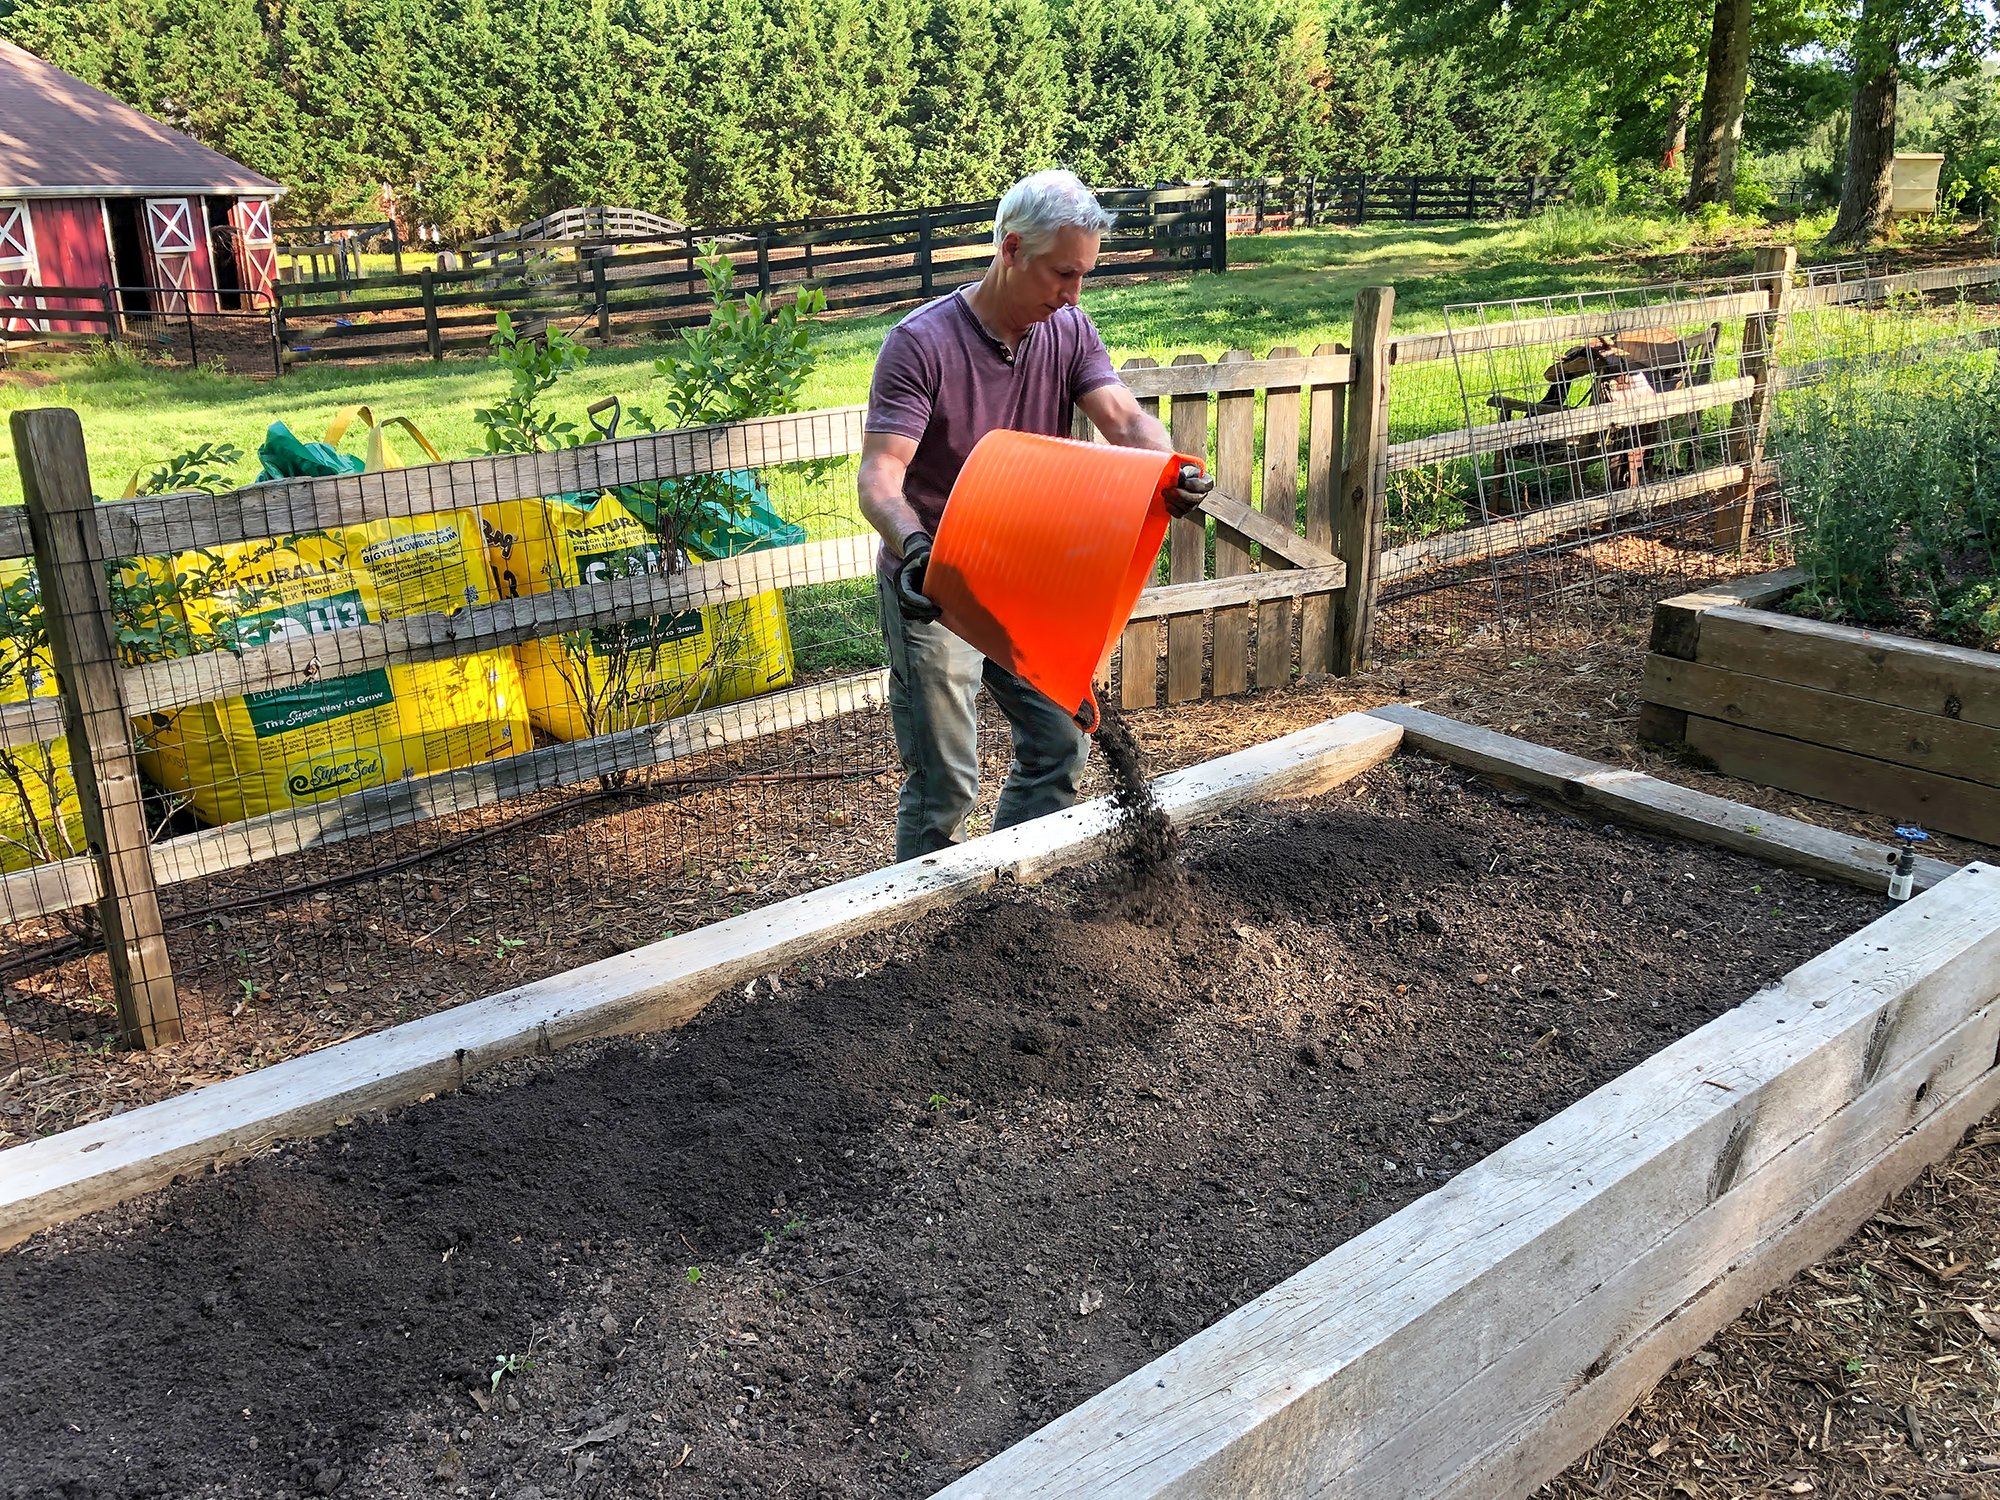 Joe Lamp'l topping off his raised beds with Soil3 compost